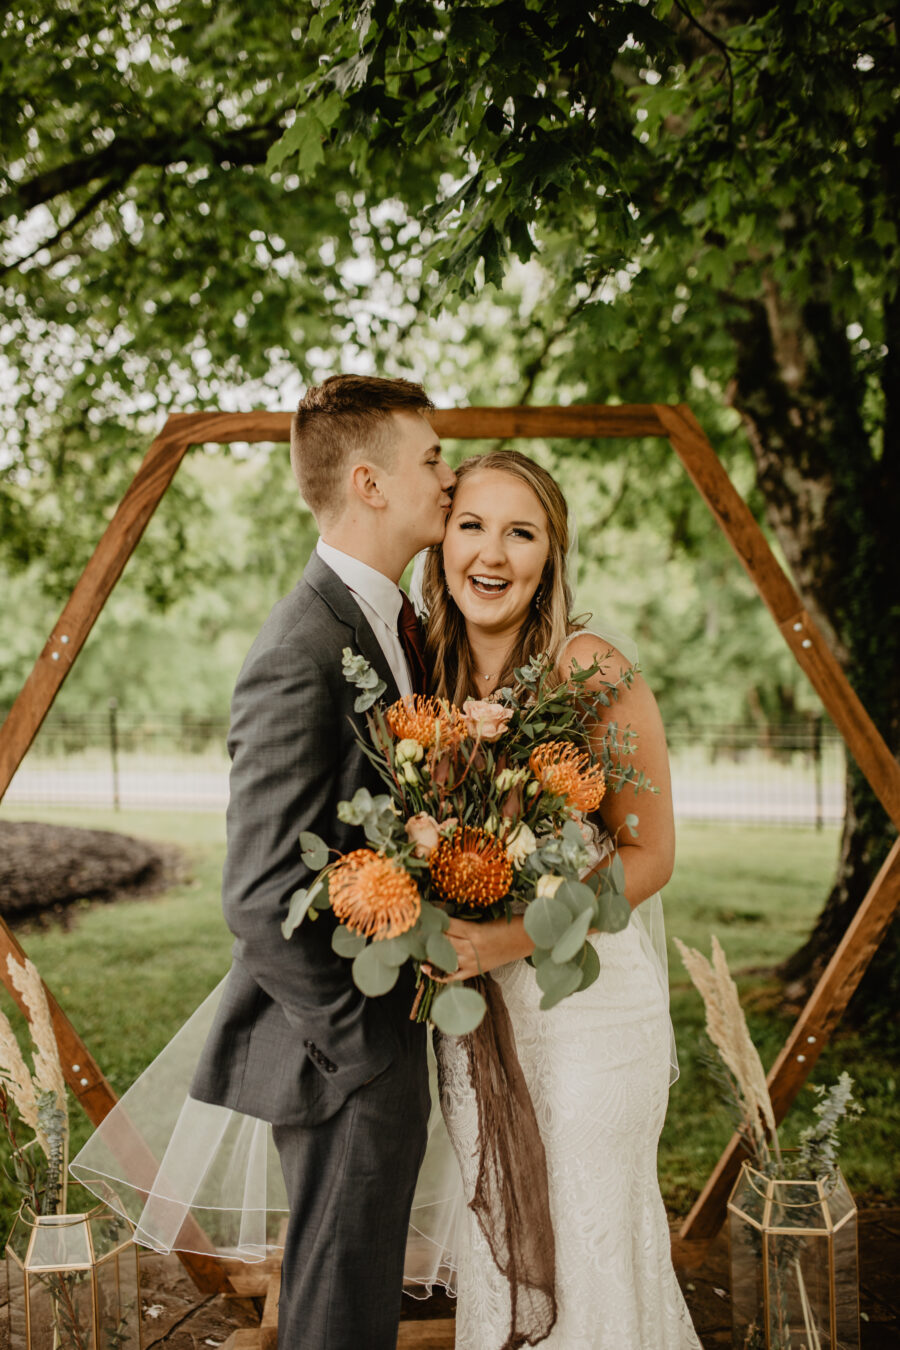 Wedding ceremony photos: Stunning Fall Styled Shoot at Promise Manor featured on Nashville Bride Guide